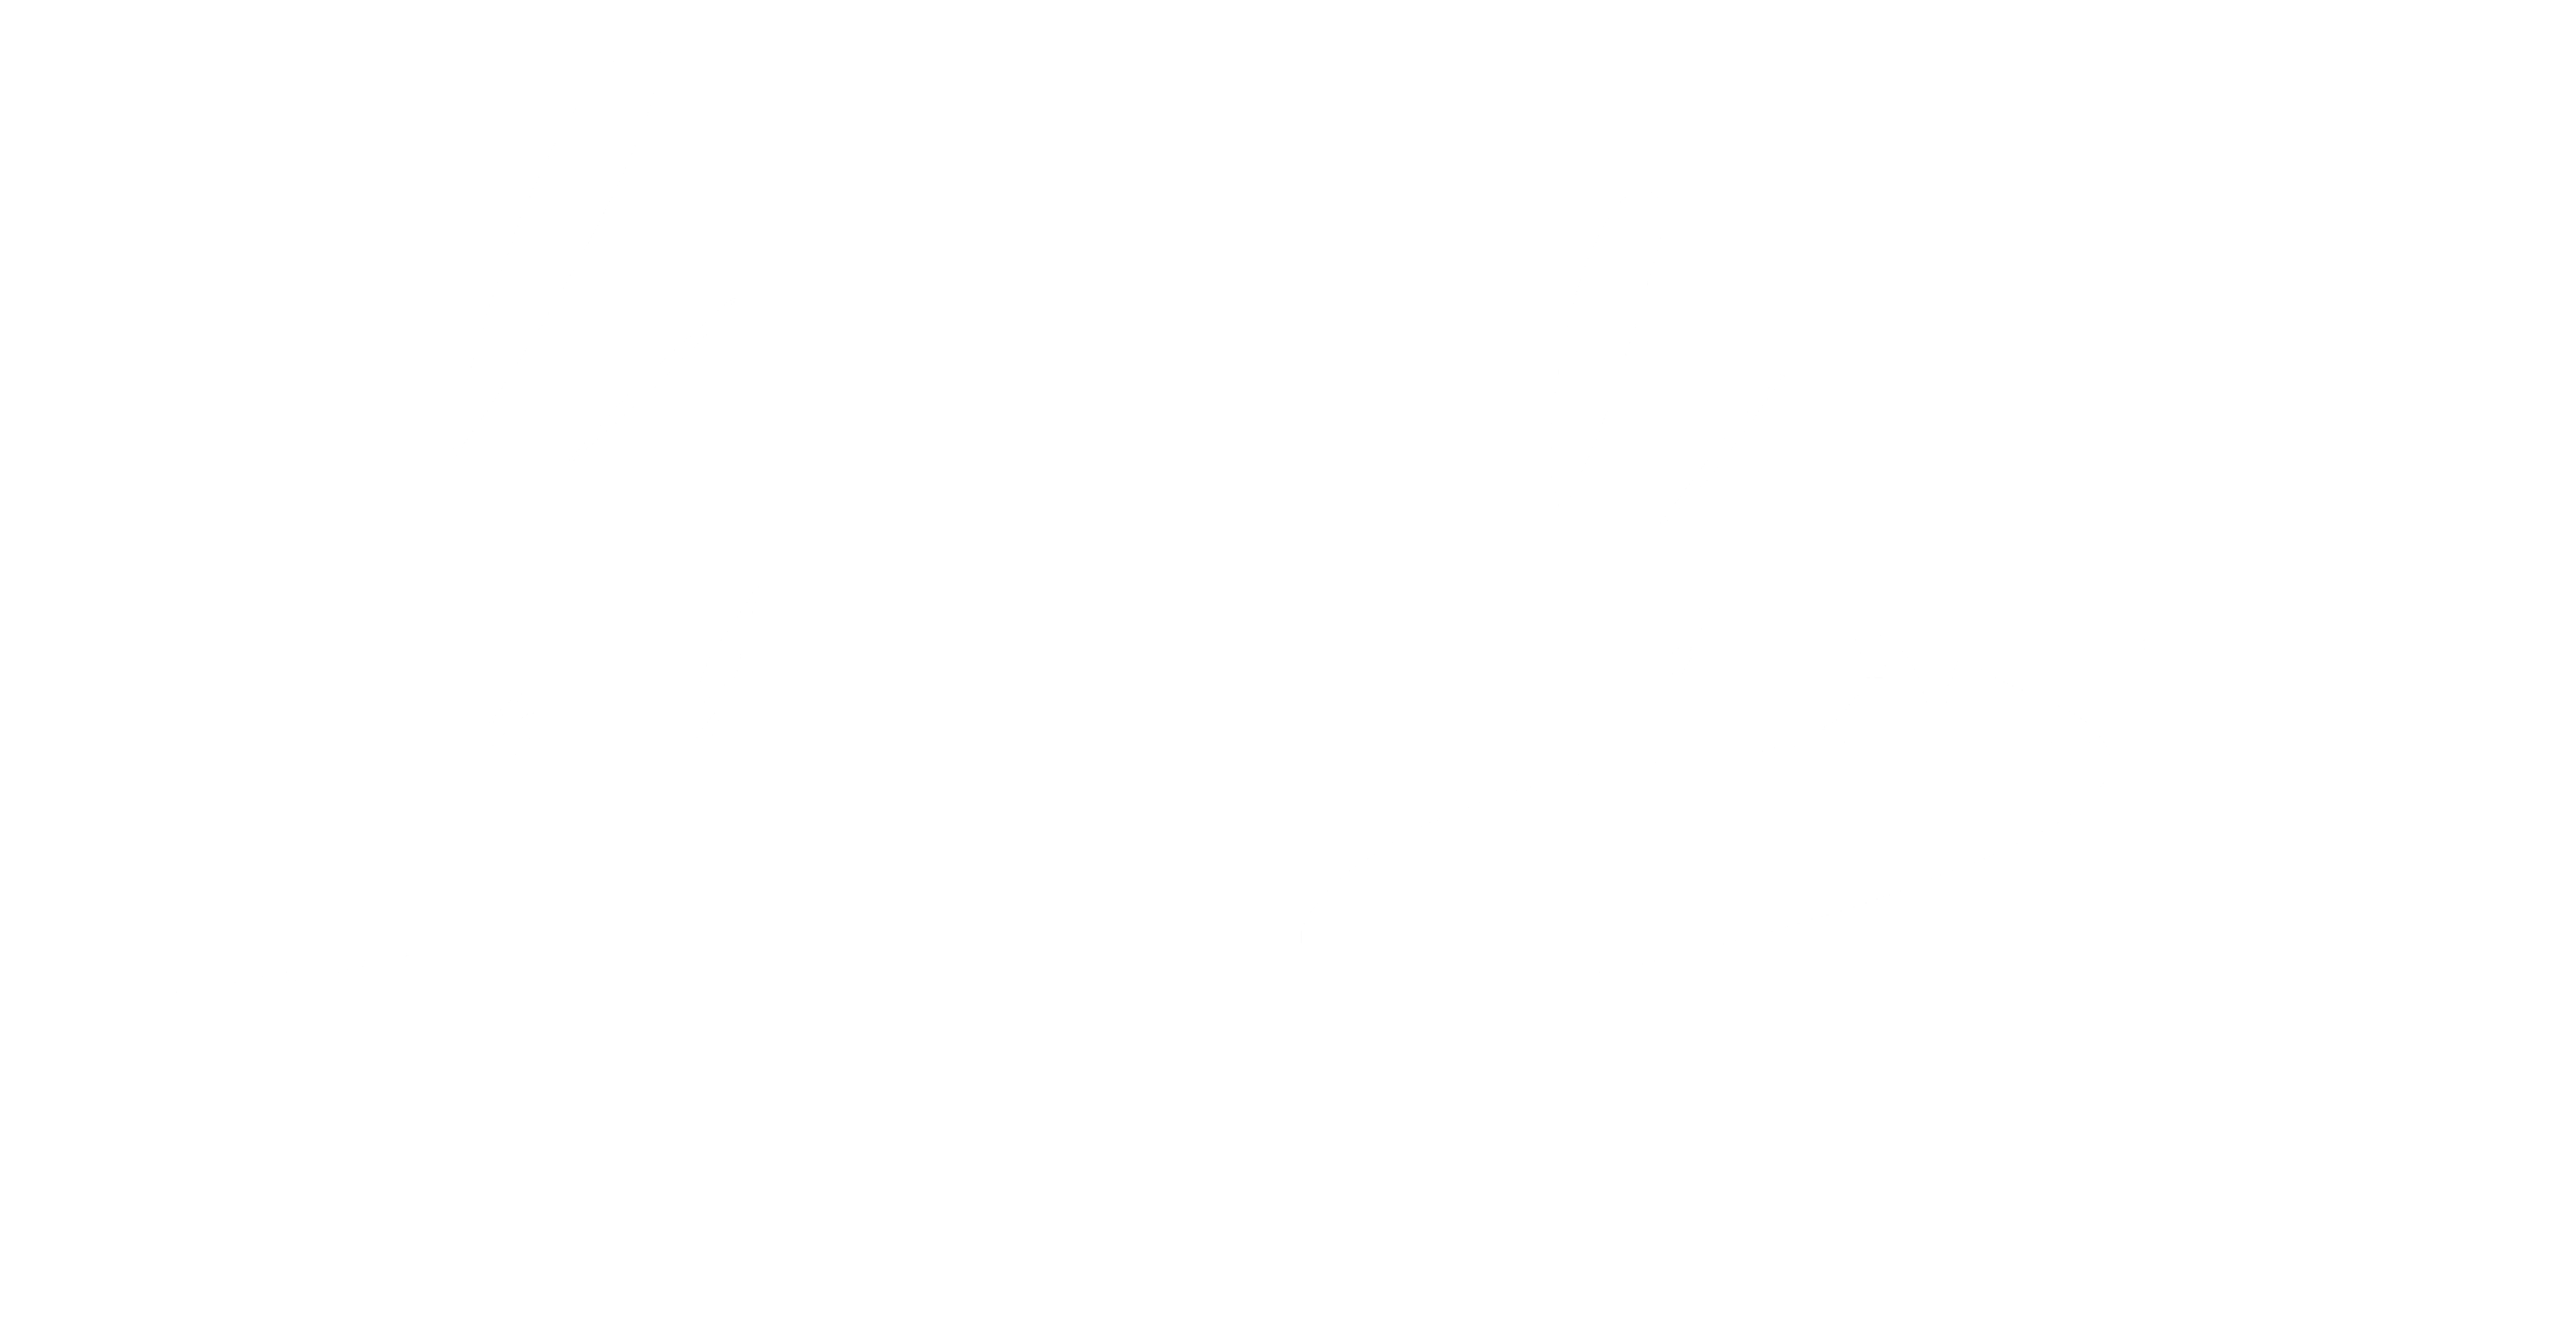 Moritz Moessinger is a Director of Photography | Cinematographer based in Hamburg and London